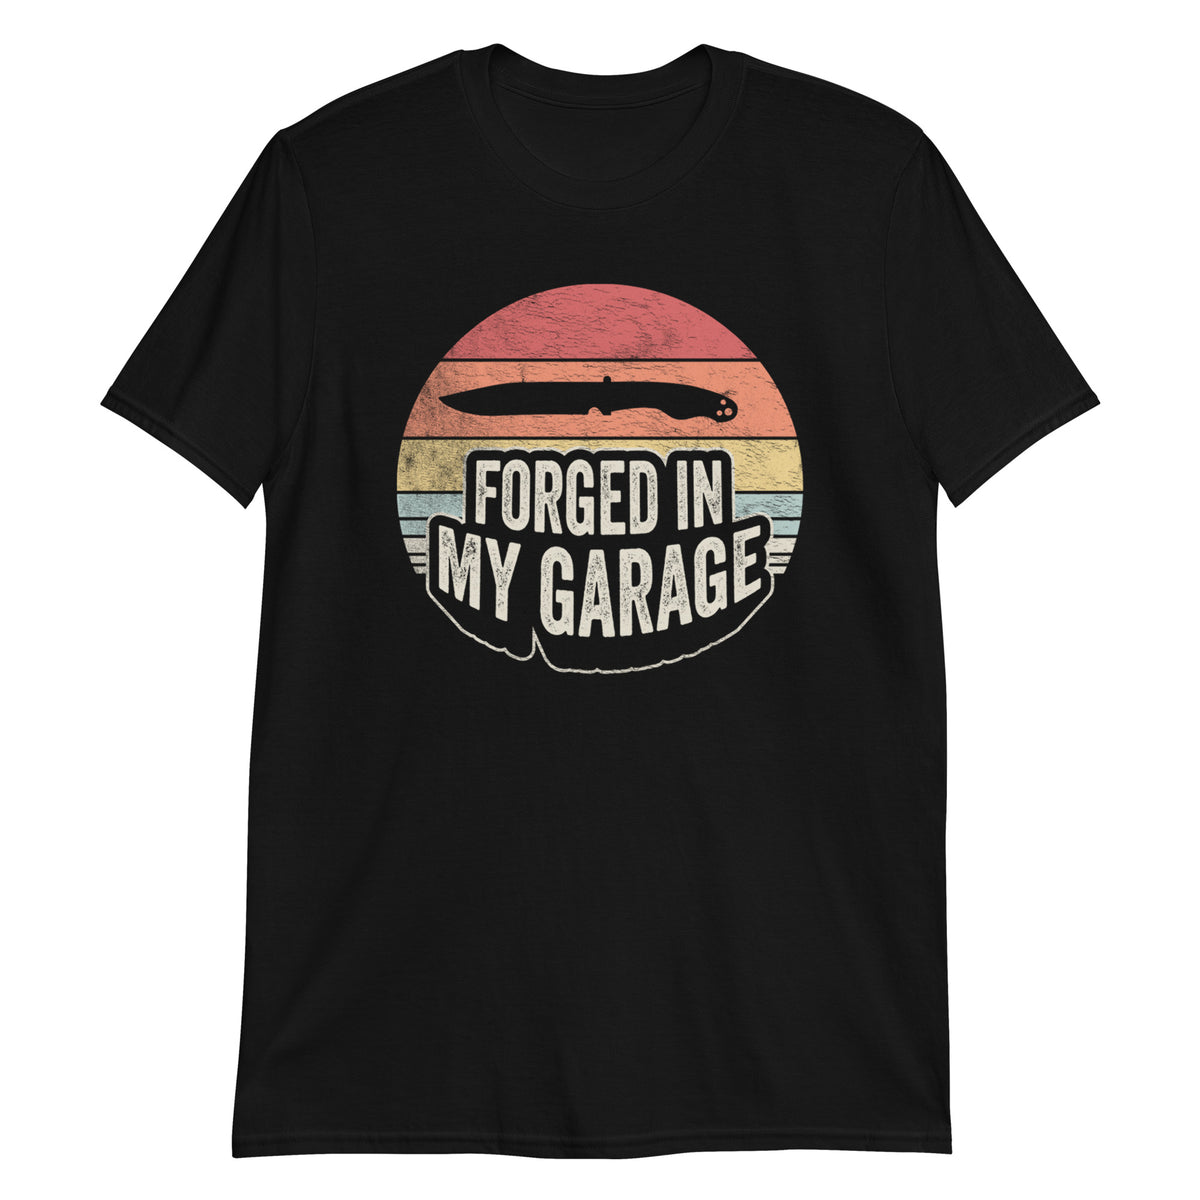 Forged in My Garage T-Shirt